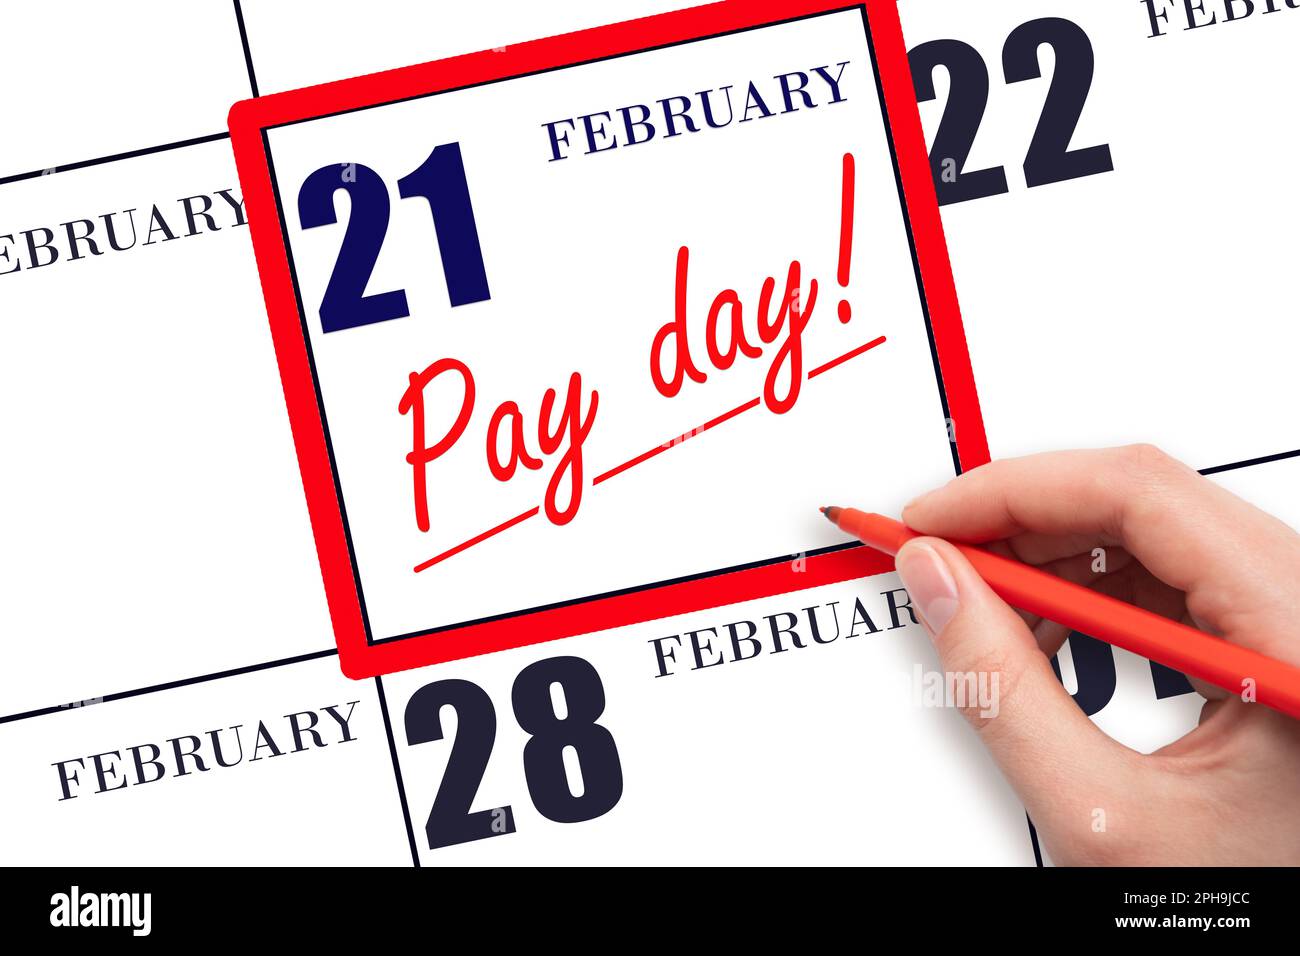 21st day of February. Hand writing text PAY DATE on calendar date February 21 and underline it. Payment due date.  Reminder concept of payment. Winter Stock Photo